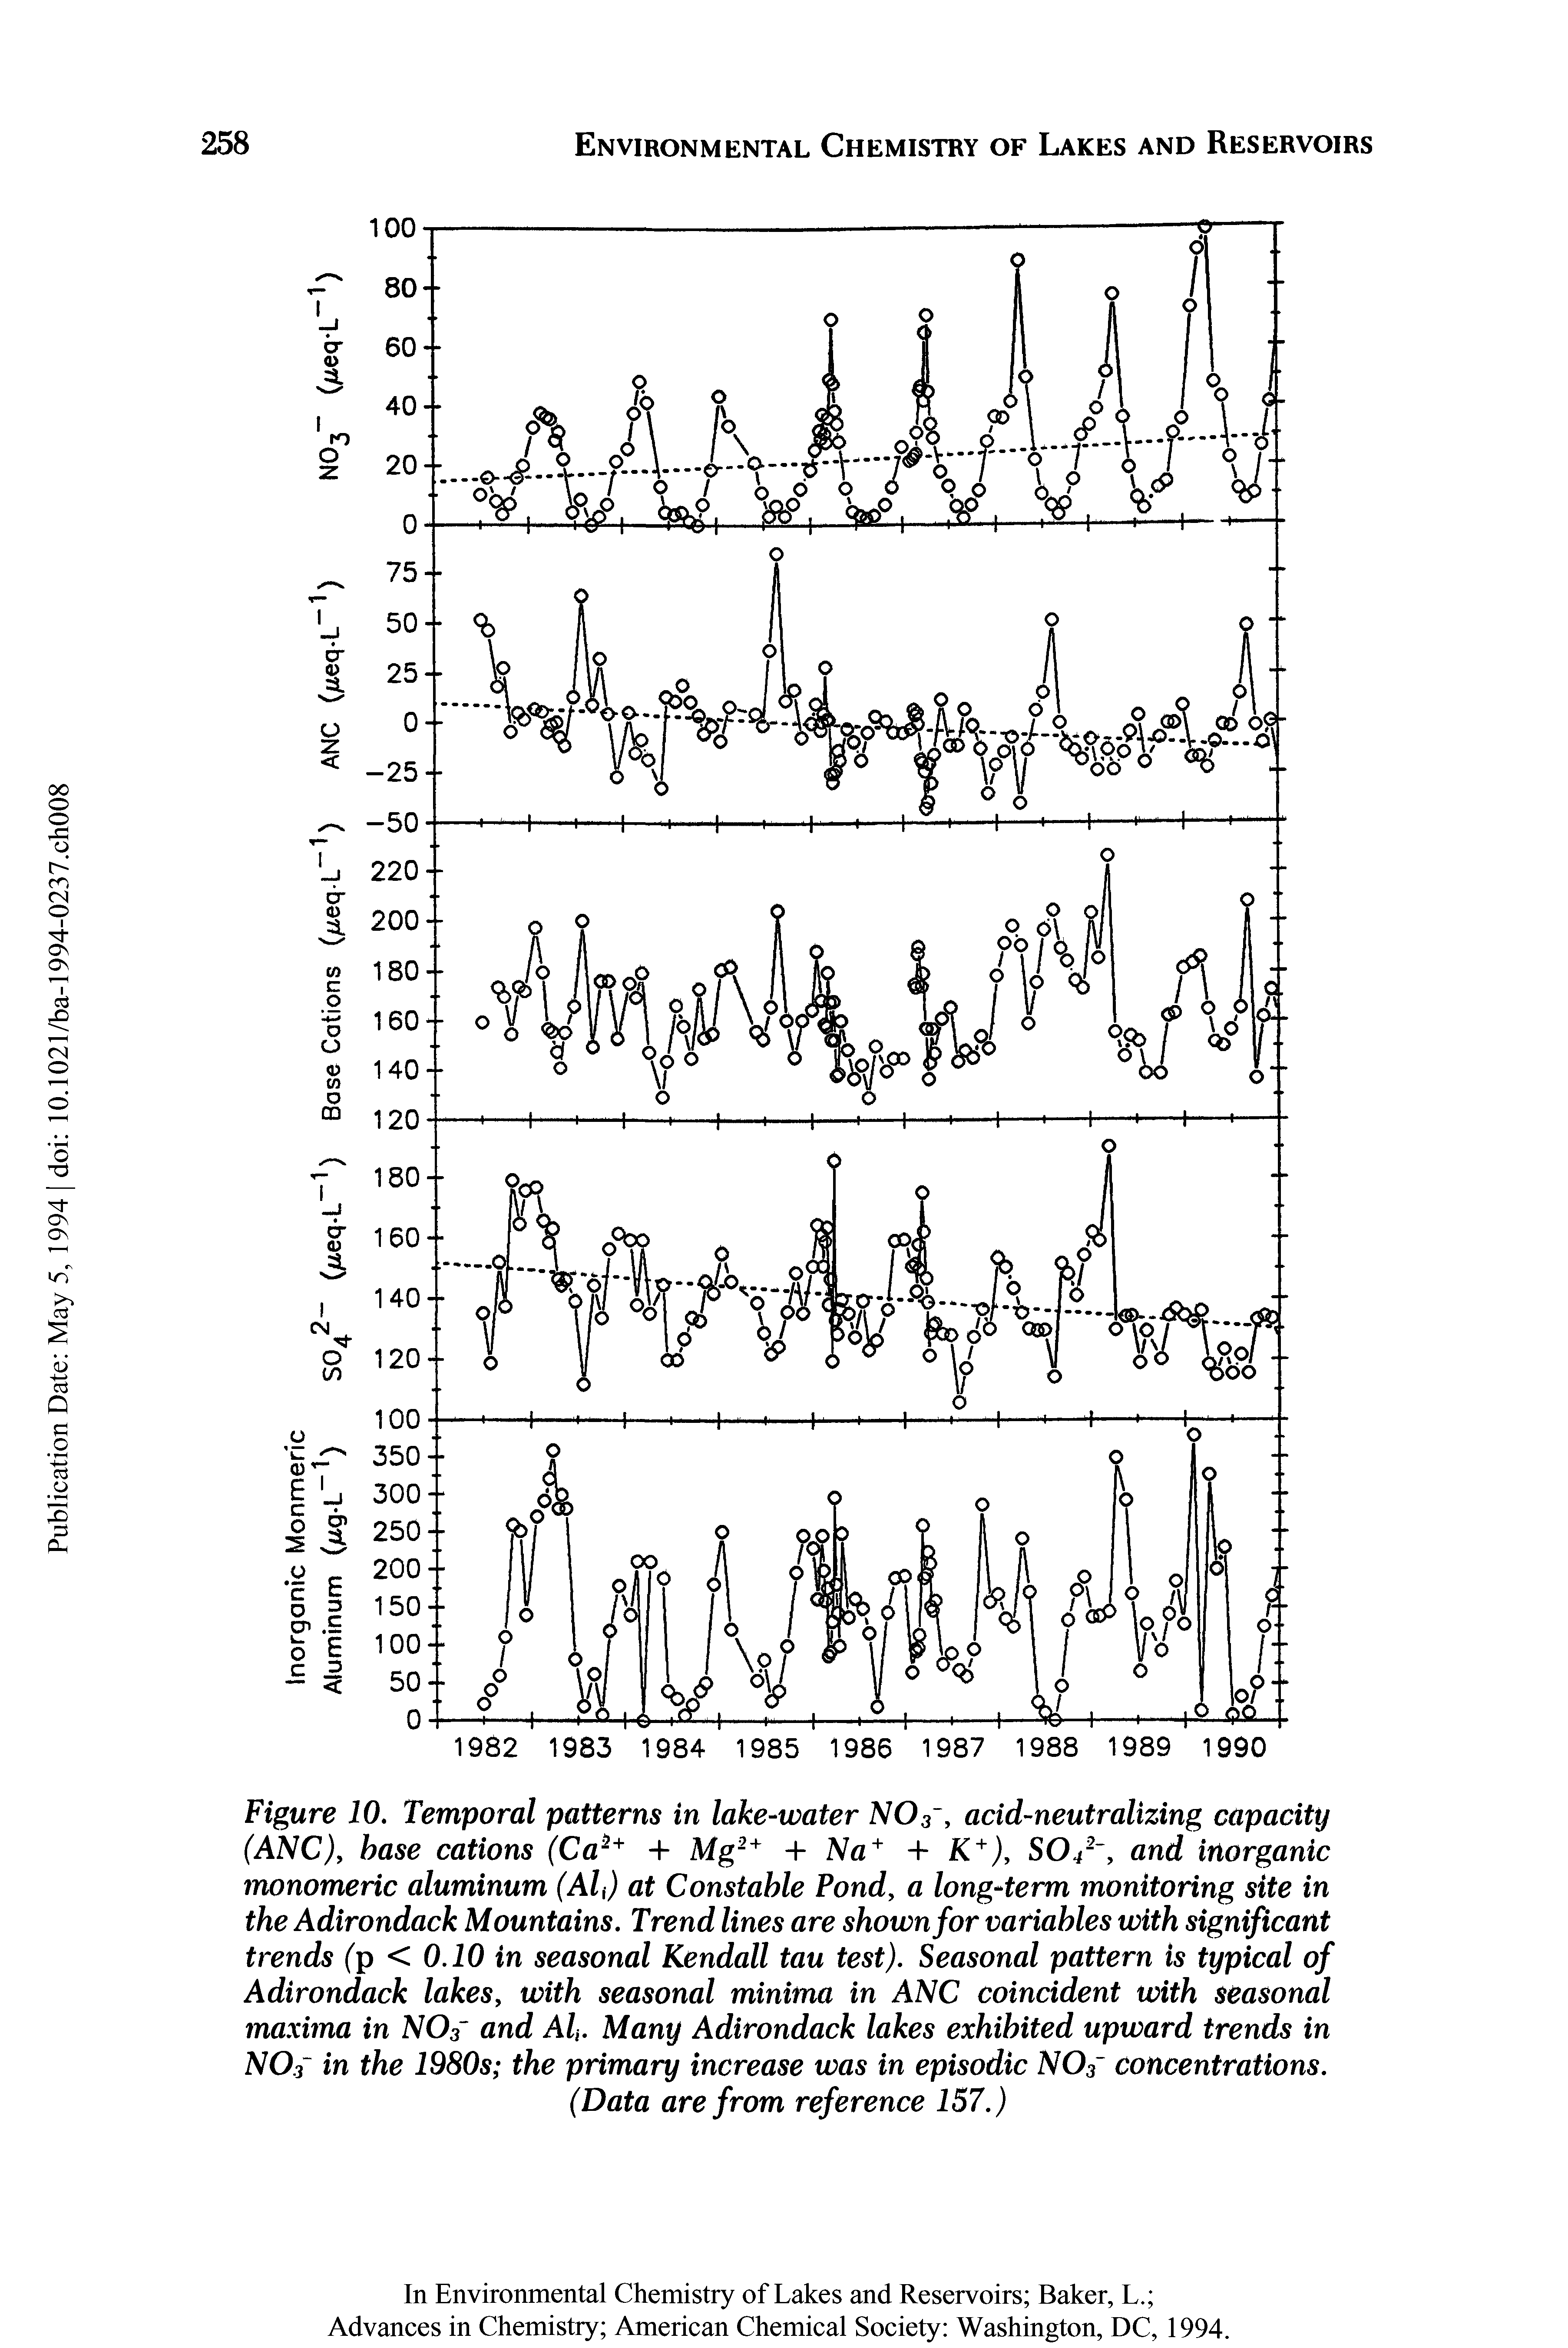 Figure 10. Temporal patterns in lake-water N03, acid-neutralizing capacity (ANC), base cations (Ca + + Mg2+ + Na+ + K+), S042, and inorganic monomeric aluminum (Al ) at Constable Pond, a long-term monitoring site in the Adirondack Mountains. Trend lines are shown for variables with significant trends (p < 0.10 in seasonal Kendall tau test). Seasonal pattern is typical of Adirondack lakes, with seasonal minima in ANC coincident with seasonal maxima in NOf and Ah. Many Adirondack lakes exhibited upward trends in N03 in the 1980s the primary increase was in episodic N03 concentrations.